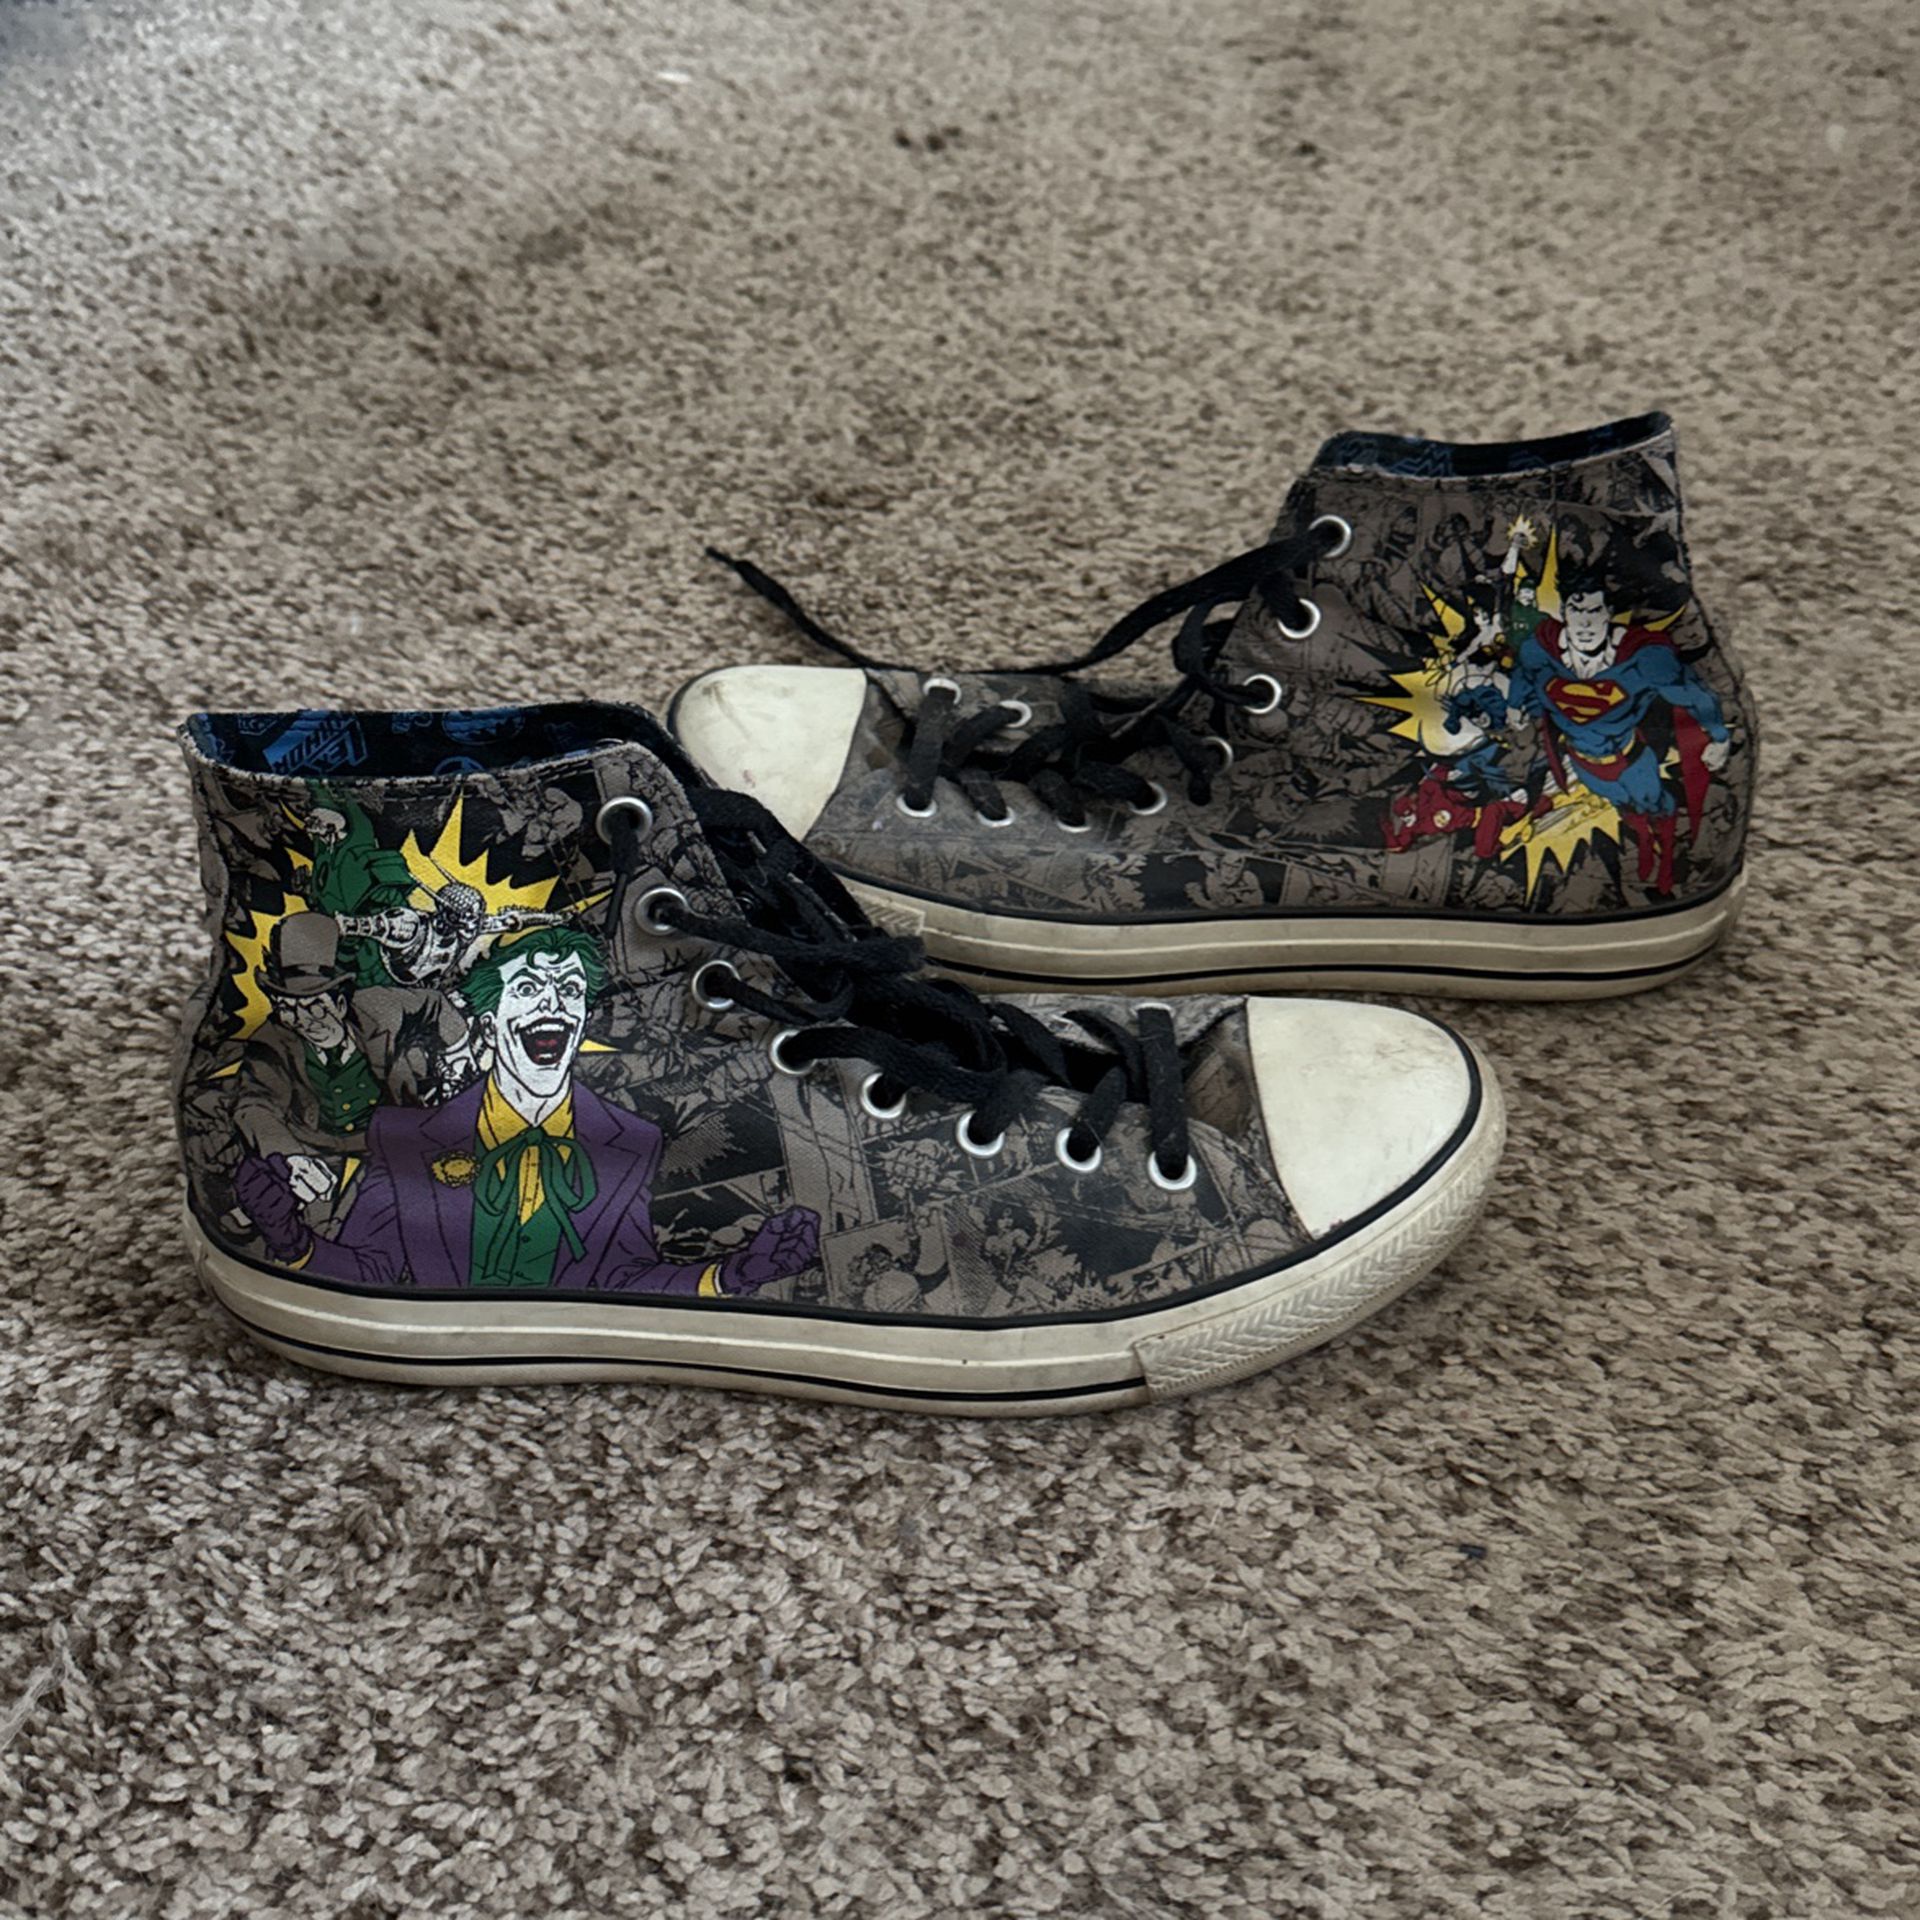 Joker And Justice League Converse Size 10